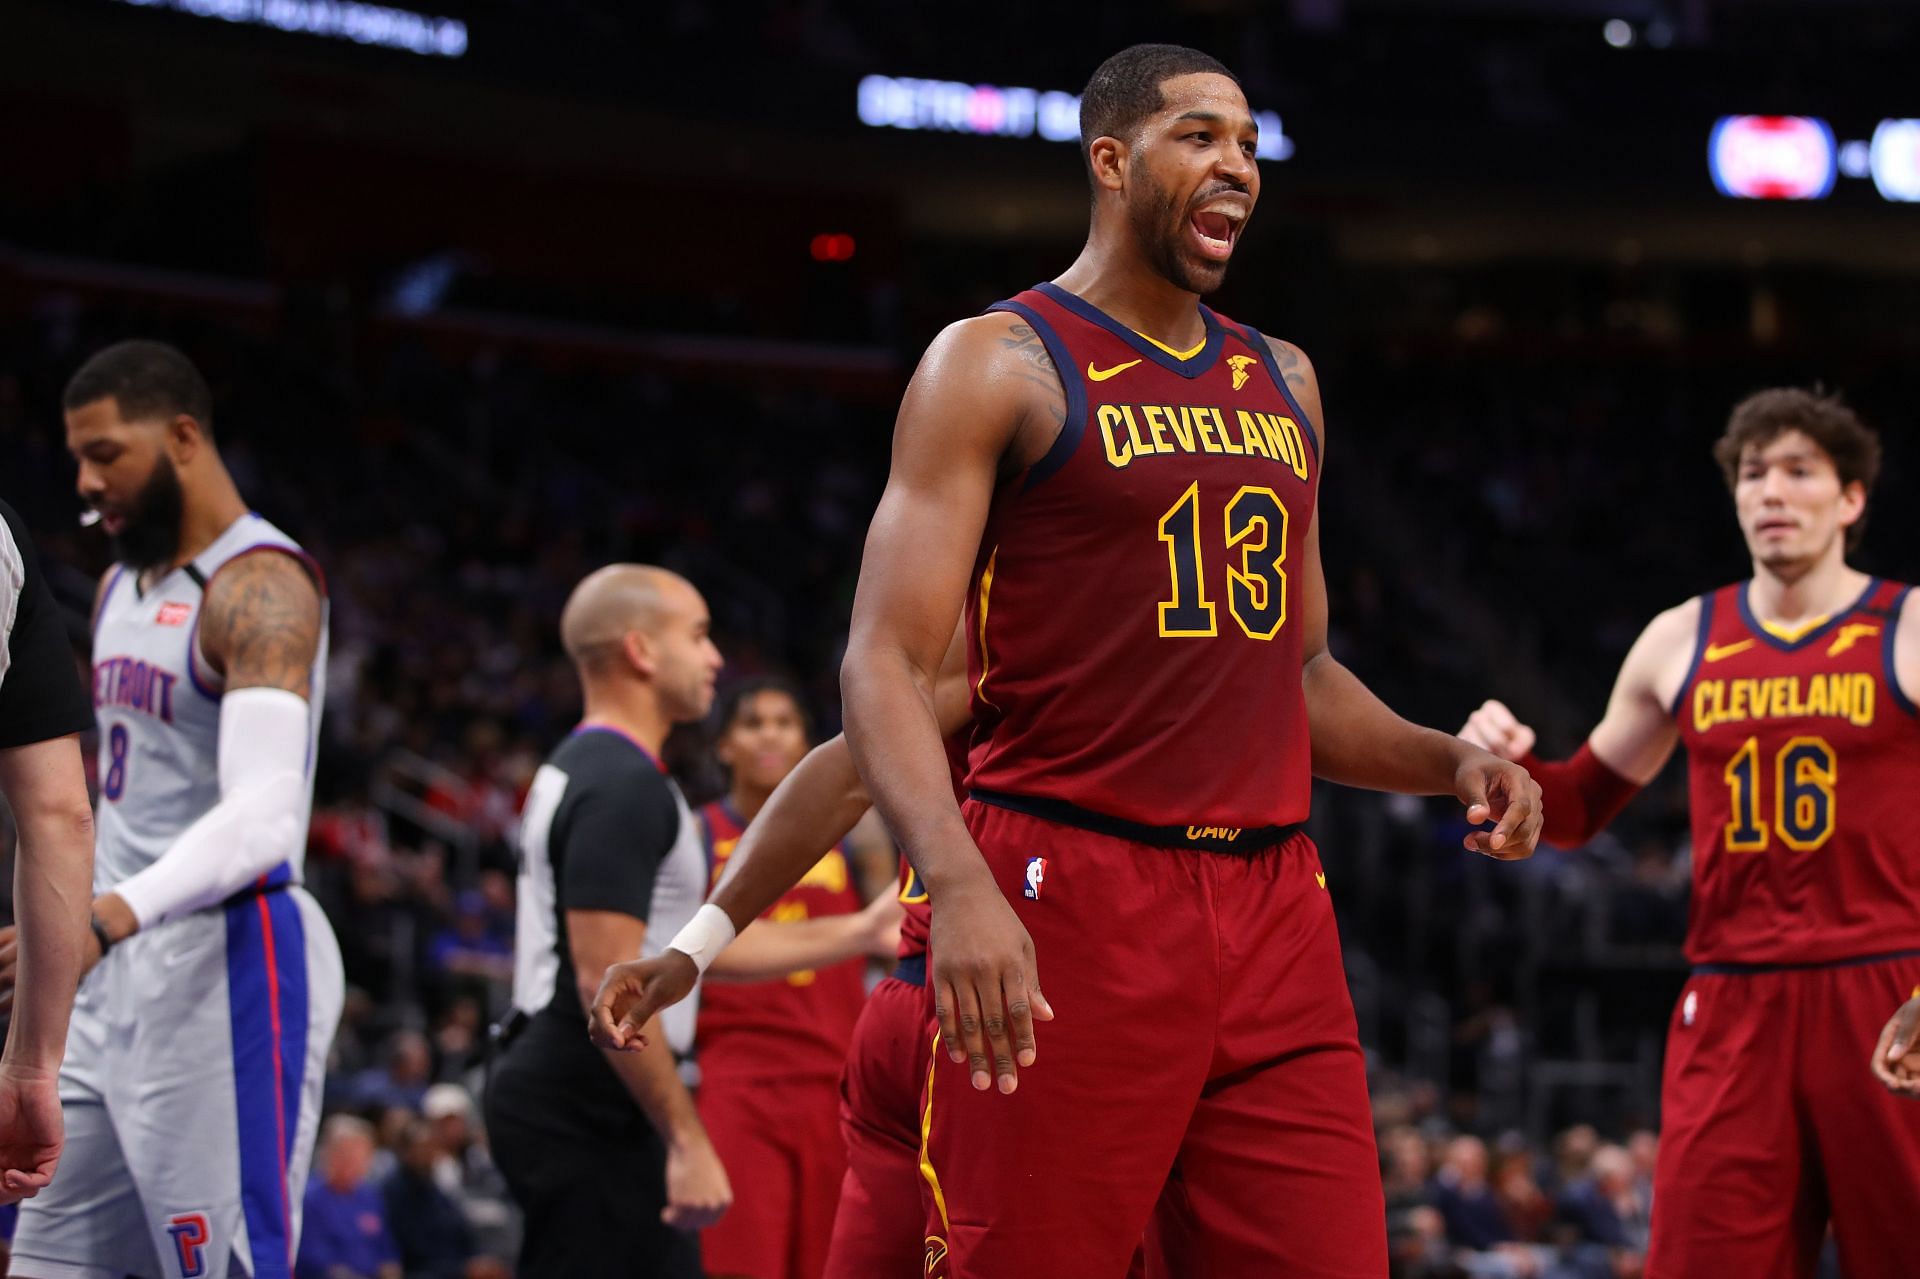 Tristan Thompson of the Cleveland Cavaliers reacts to a basket against the Detroit Pistons at Little Caesars Arena on Jan. 27, 2020, in Detroit, Michigan. Cleveland won the game 115-100.